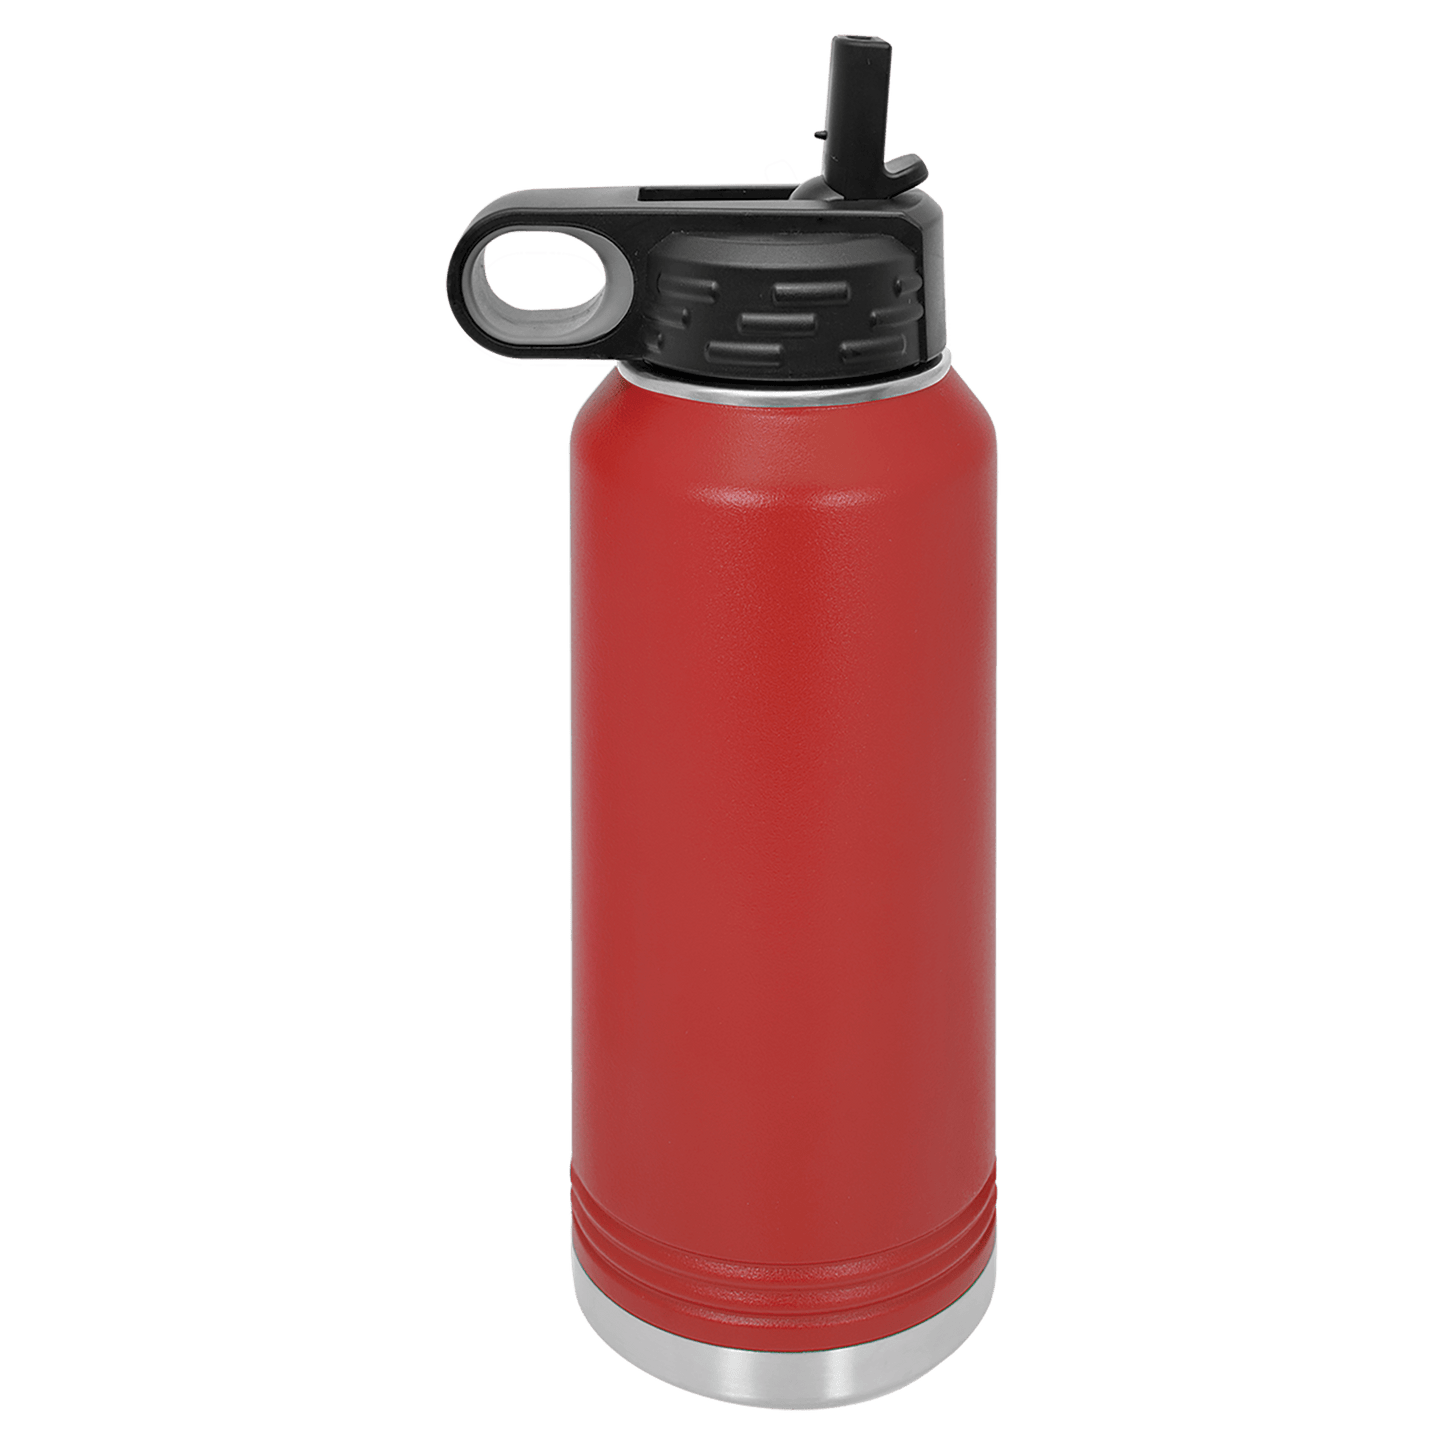 32 oz. Insulated Water Bottle - with or without the number.  QUANTITY DISCOUNTS AVAILABLE!